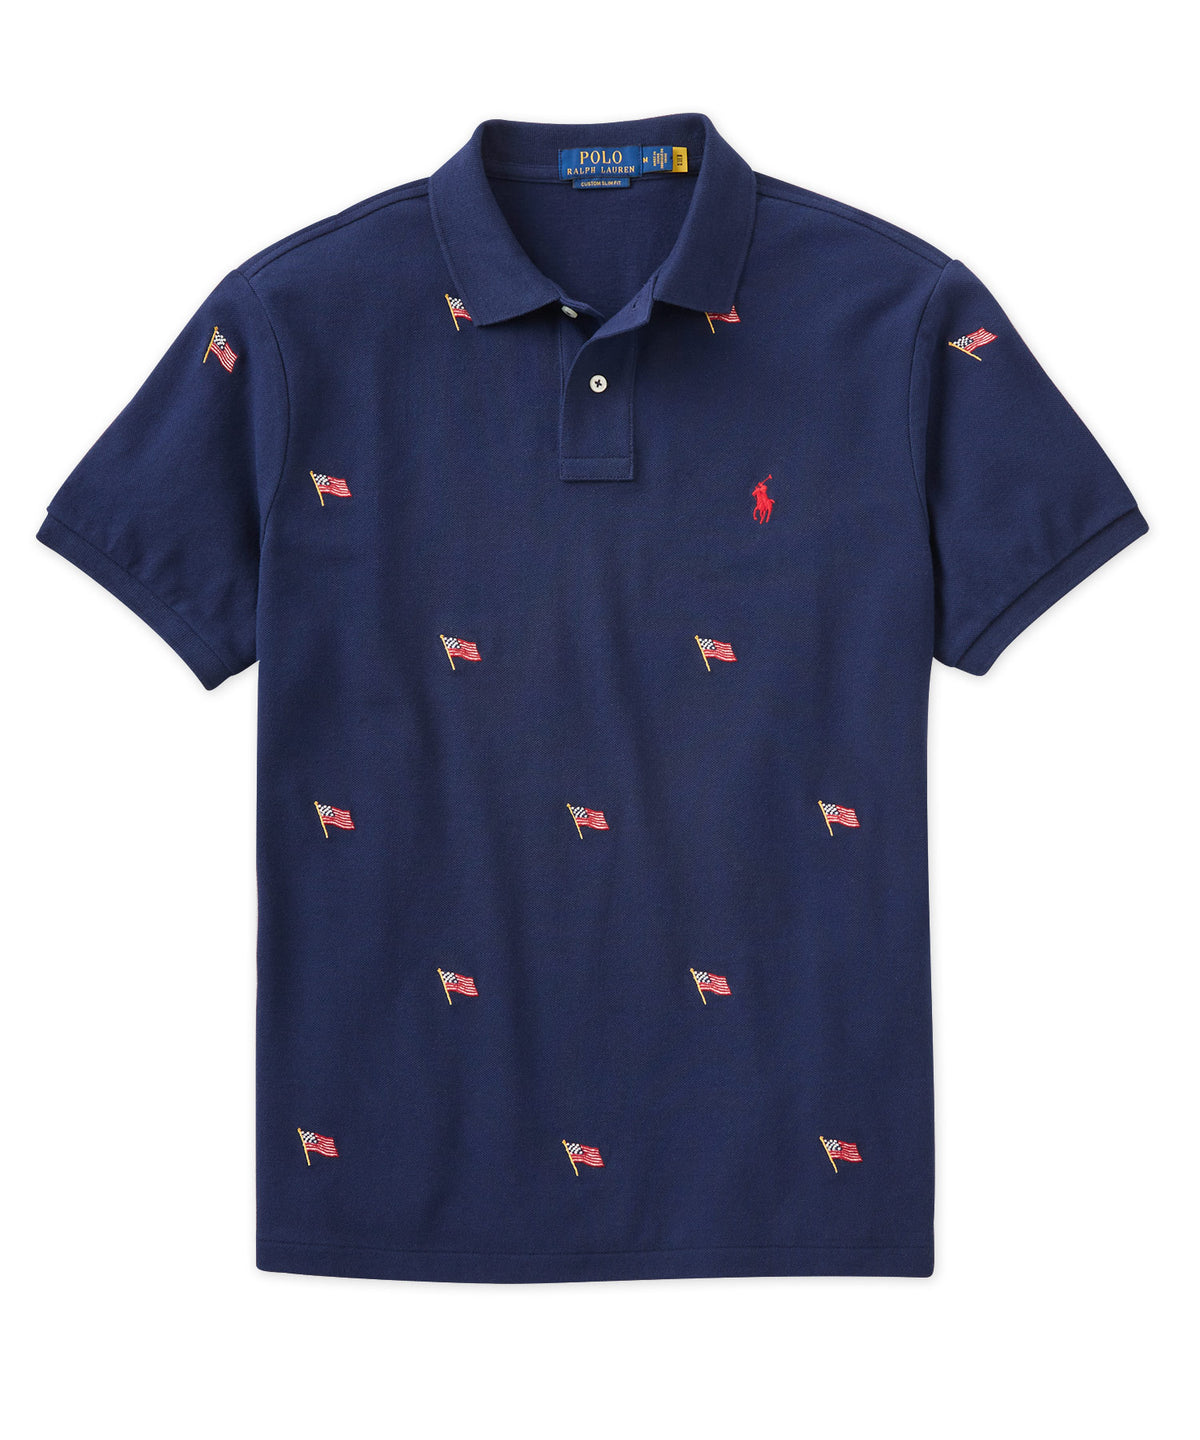 Polo Ralph Lauren Short Sleeve Embroidered Polo, Men's Big & Tall